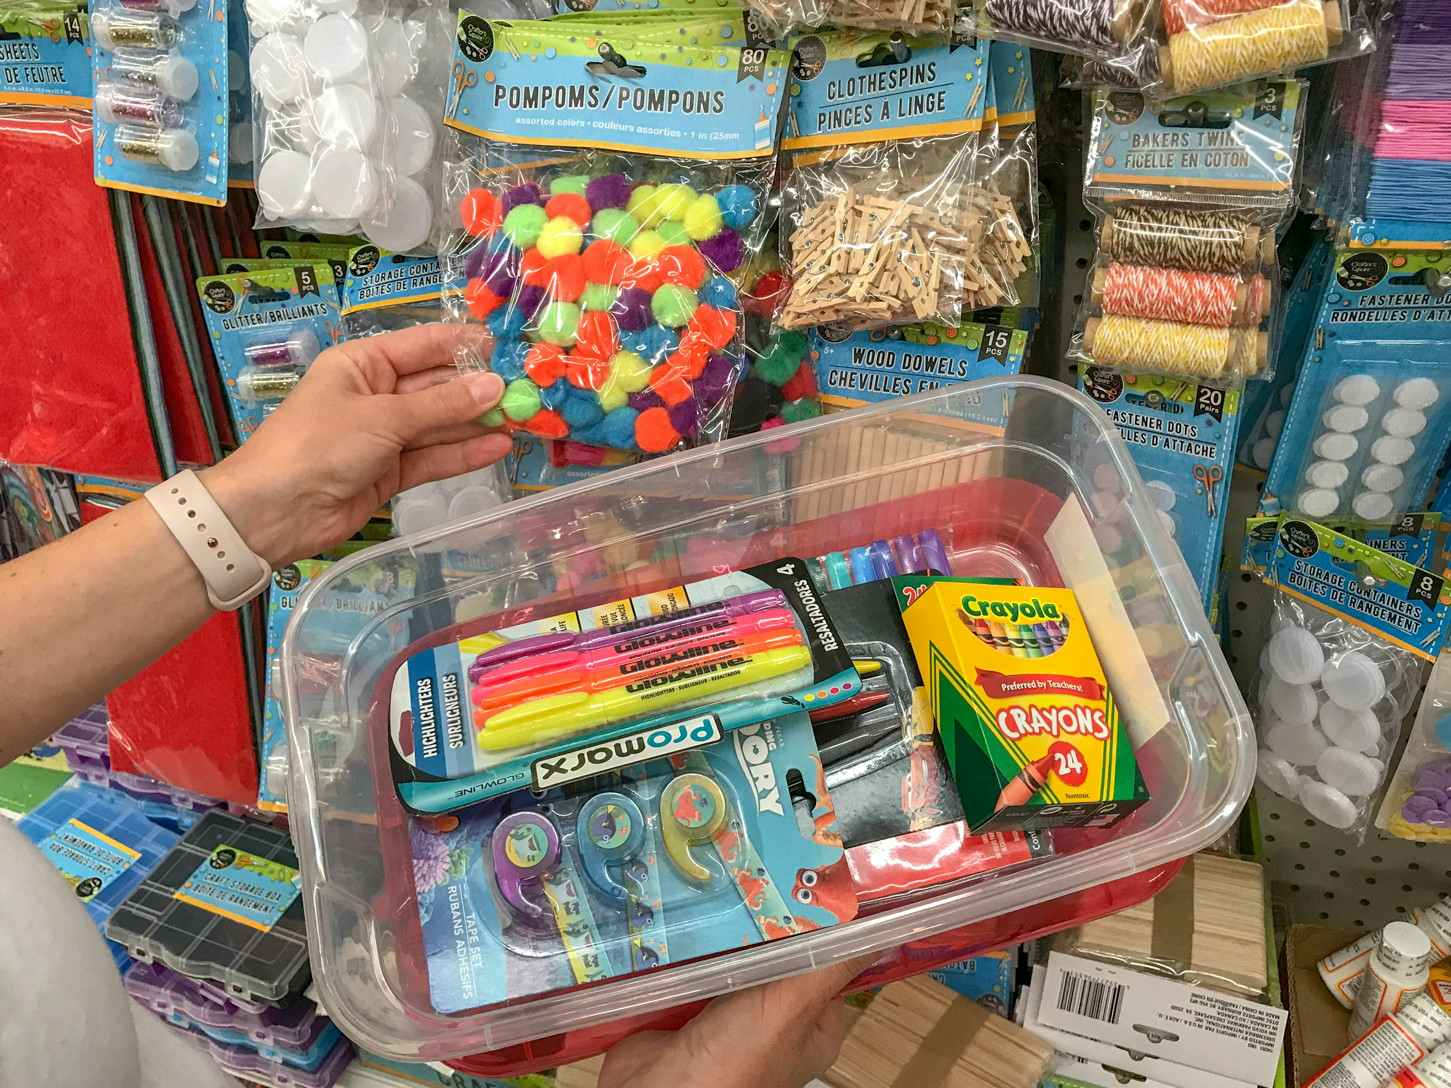 A person's hands holding a tupperware tub filled with art supplies next to a wall of art and craft supplies at a store.